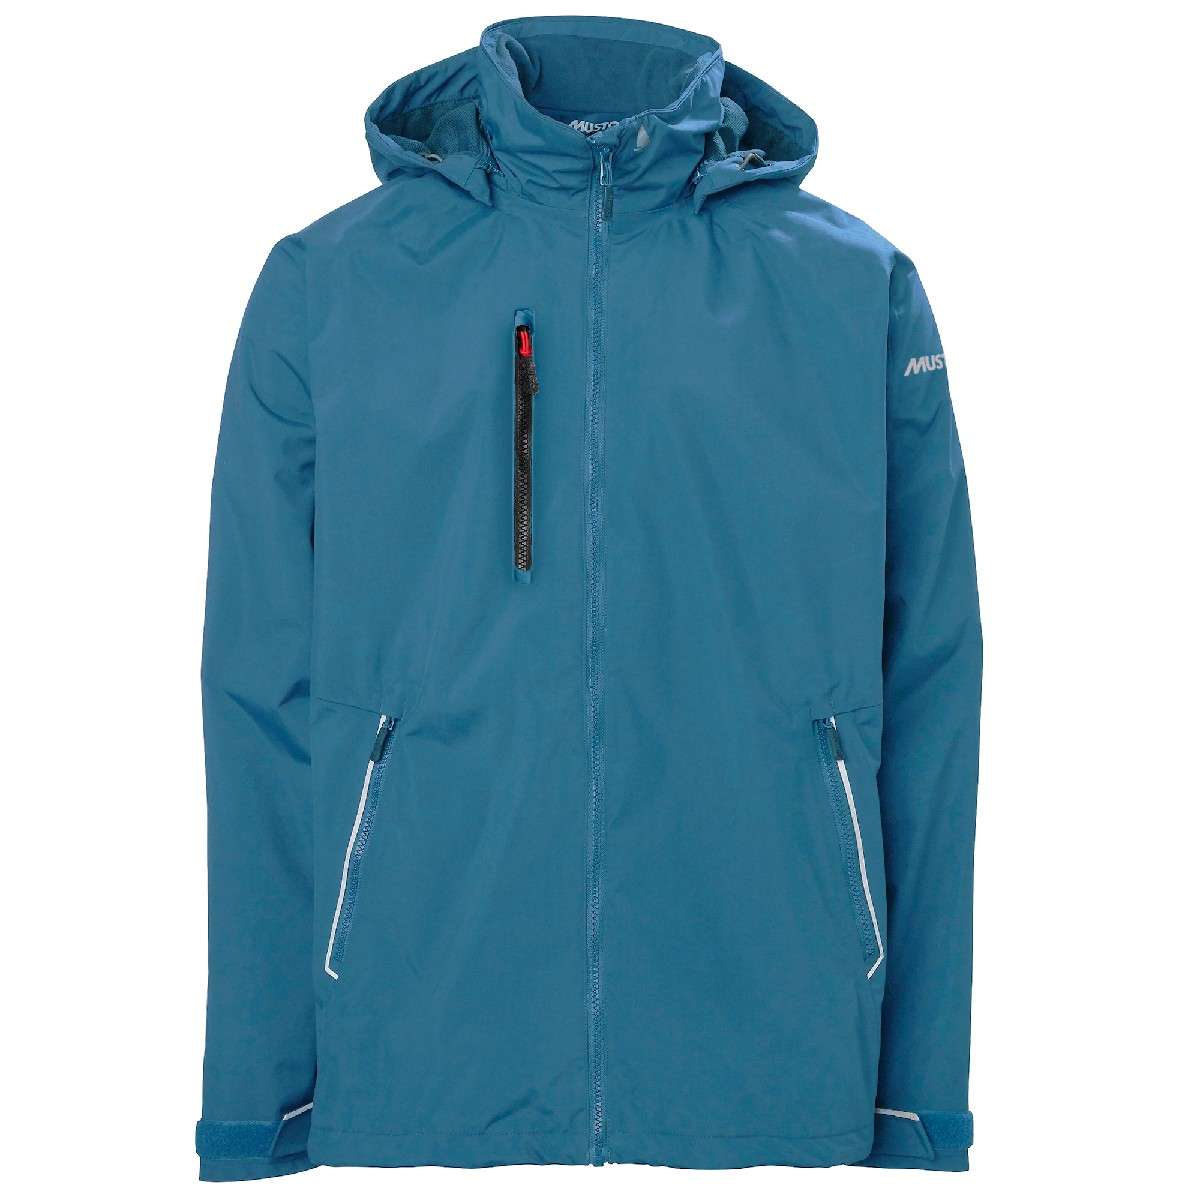 Musto Corsica Jacket 2.0 Cove Blue | Captain Watts Chandlery